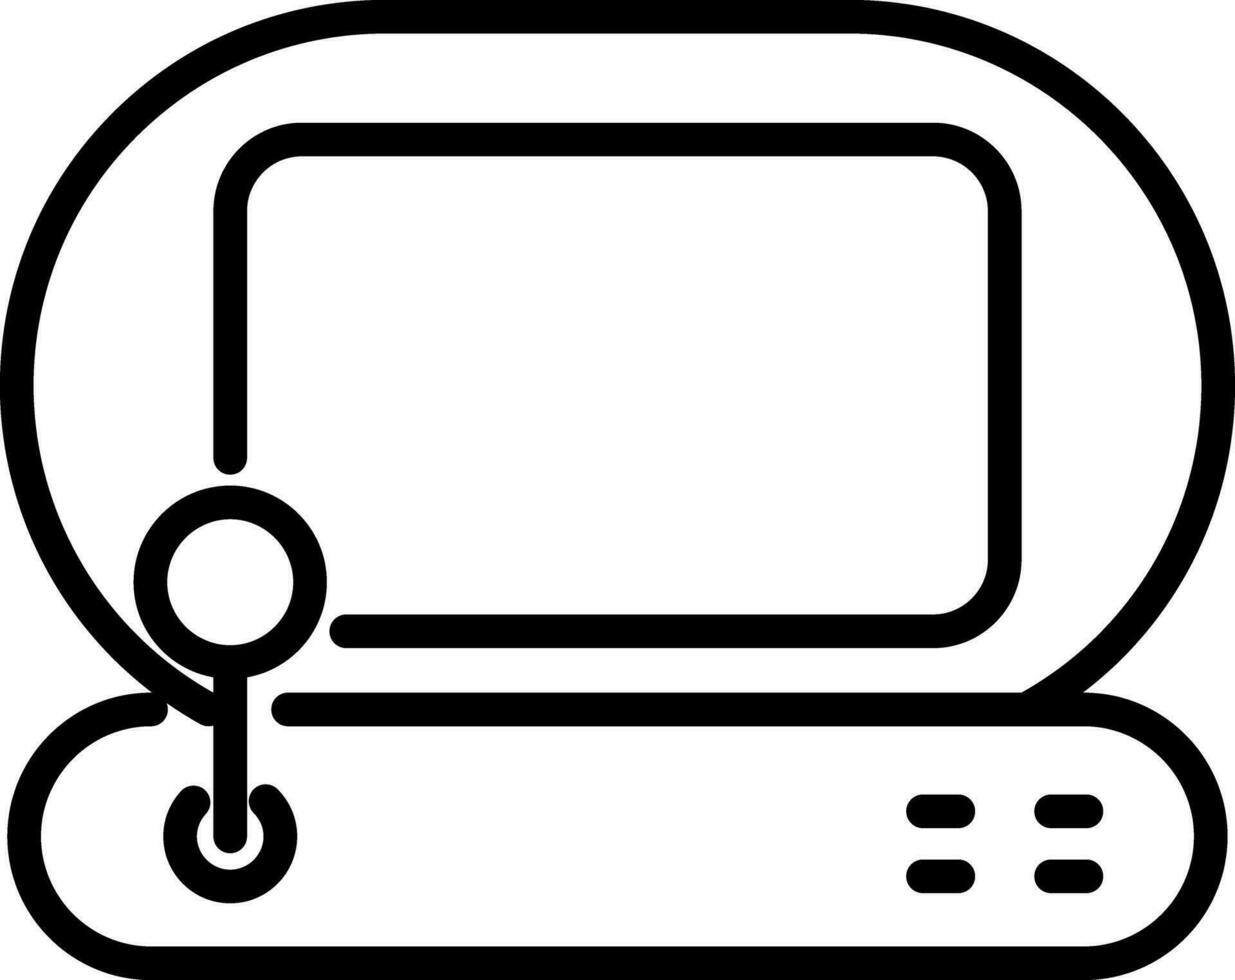 Computer video game icon in black line art. vector